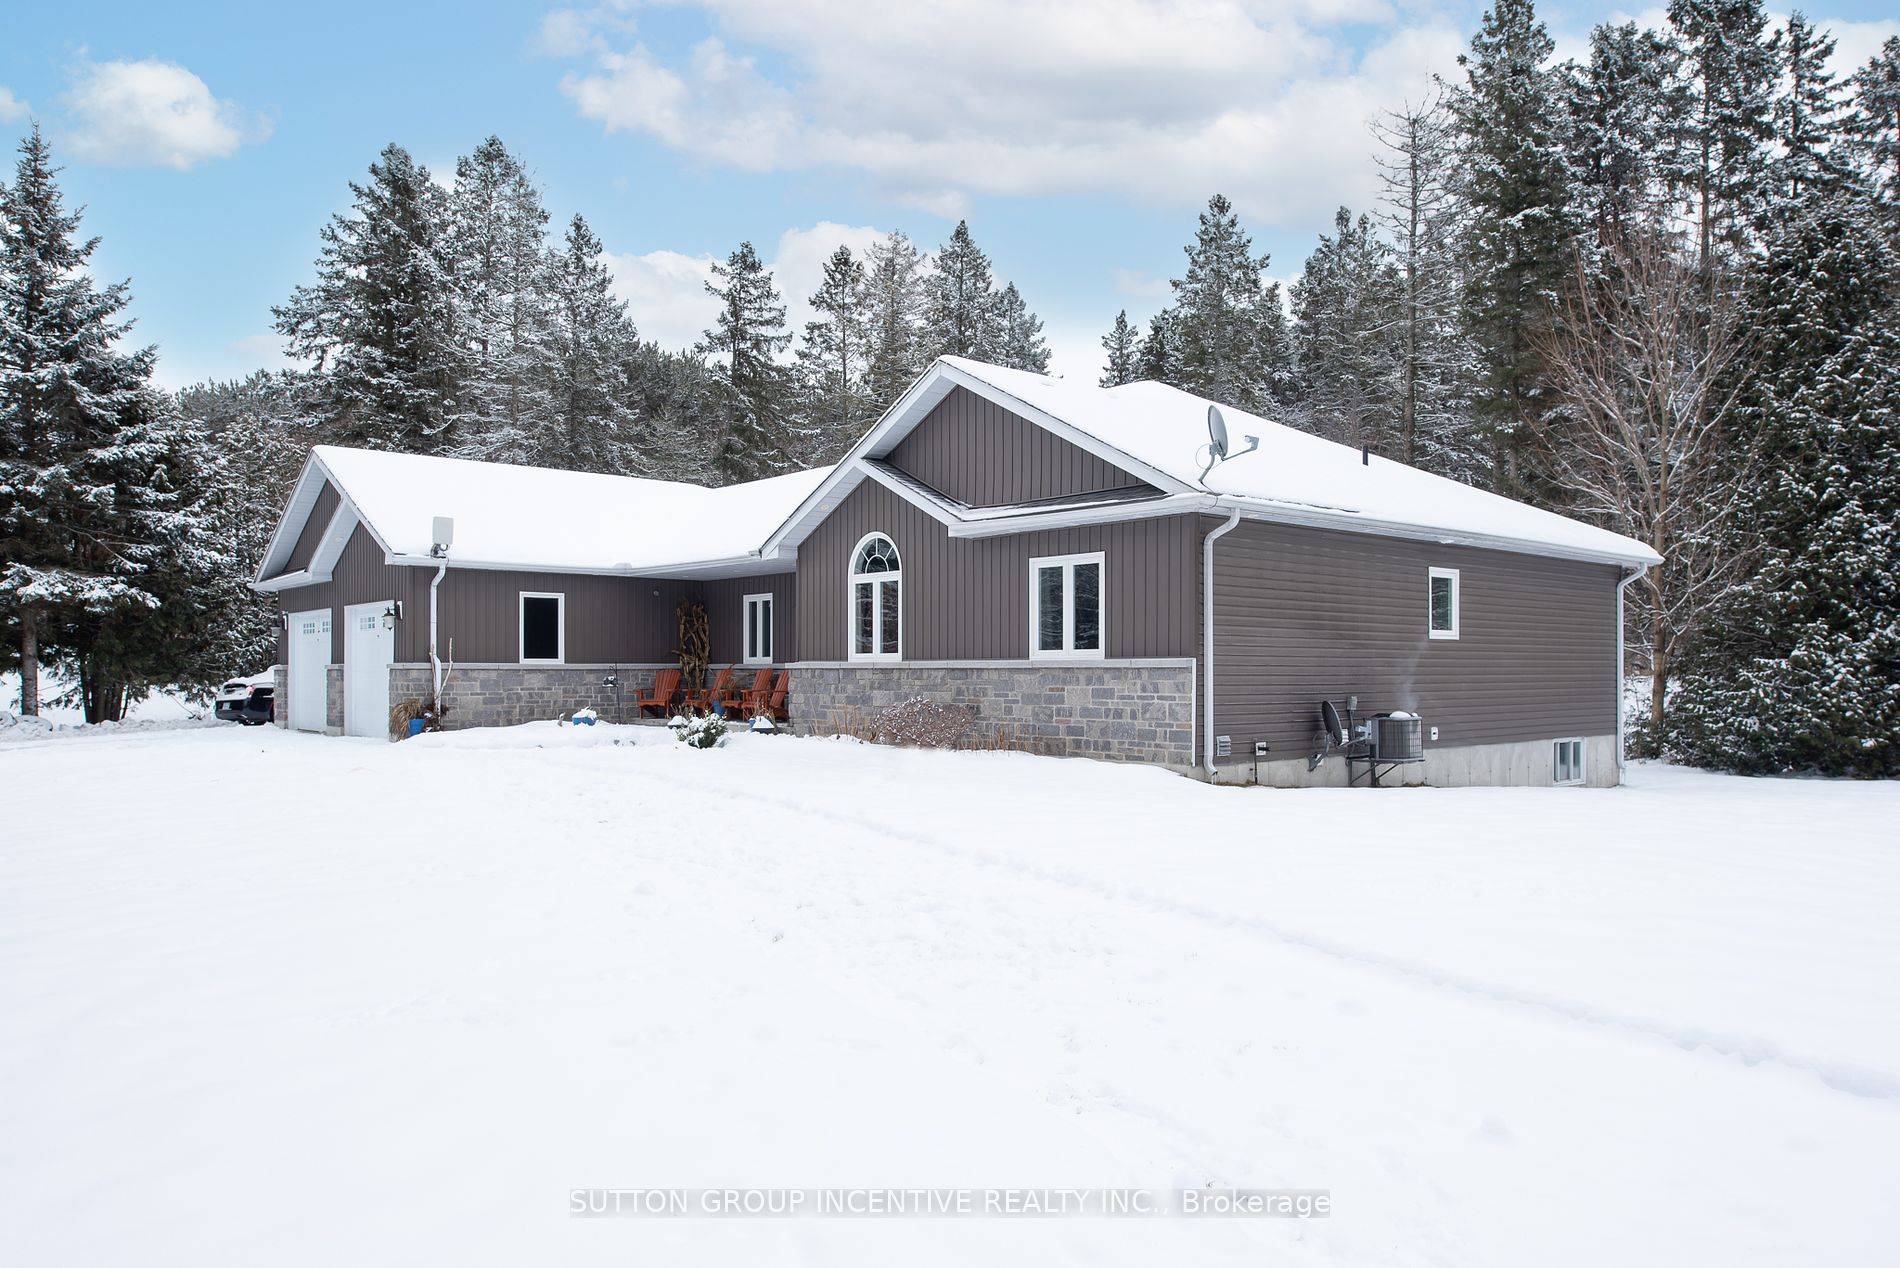 This seven year old Executive 3 bedroom bungalow in sought after Sprucewood Estates is ideally situated between Barrie and Orillia with easy highway access.